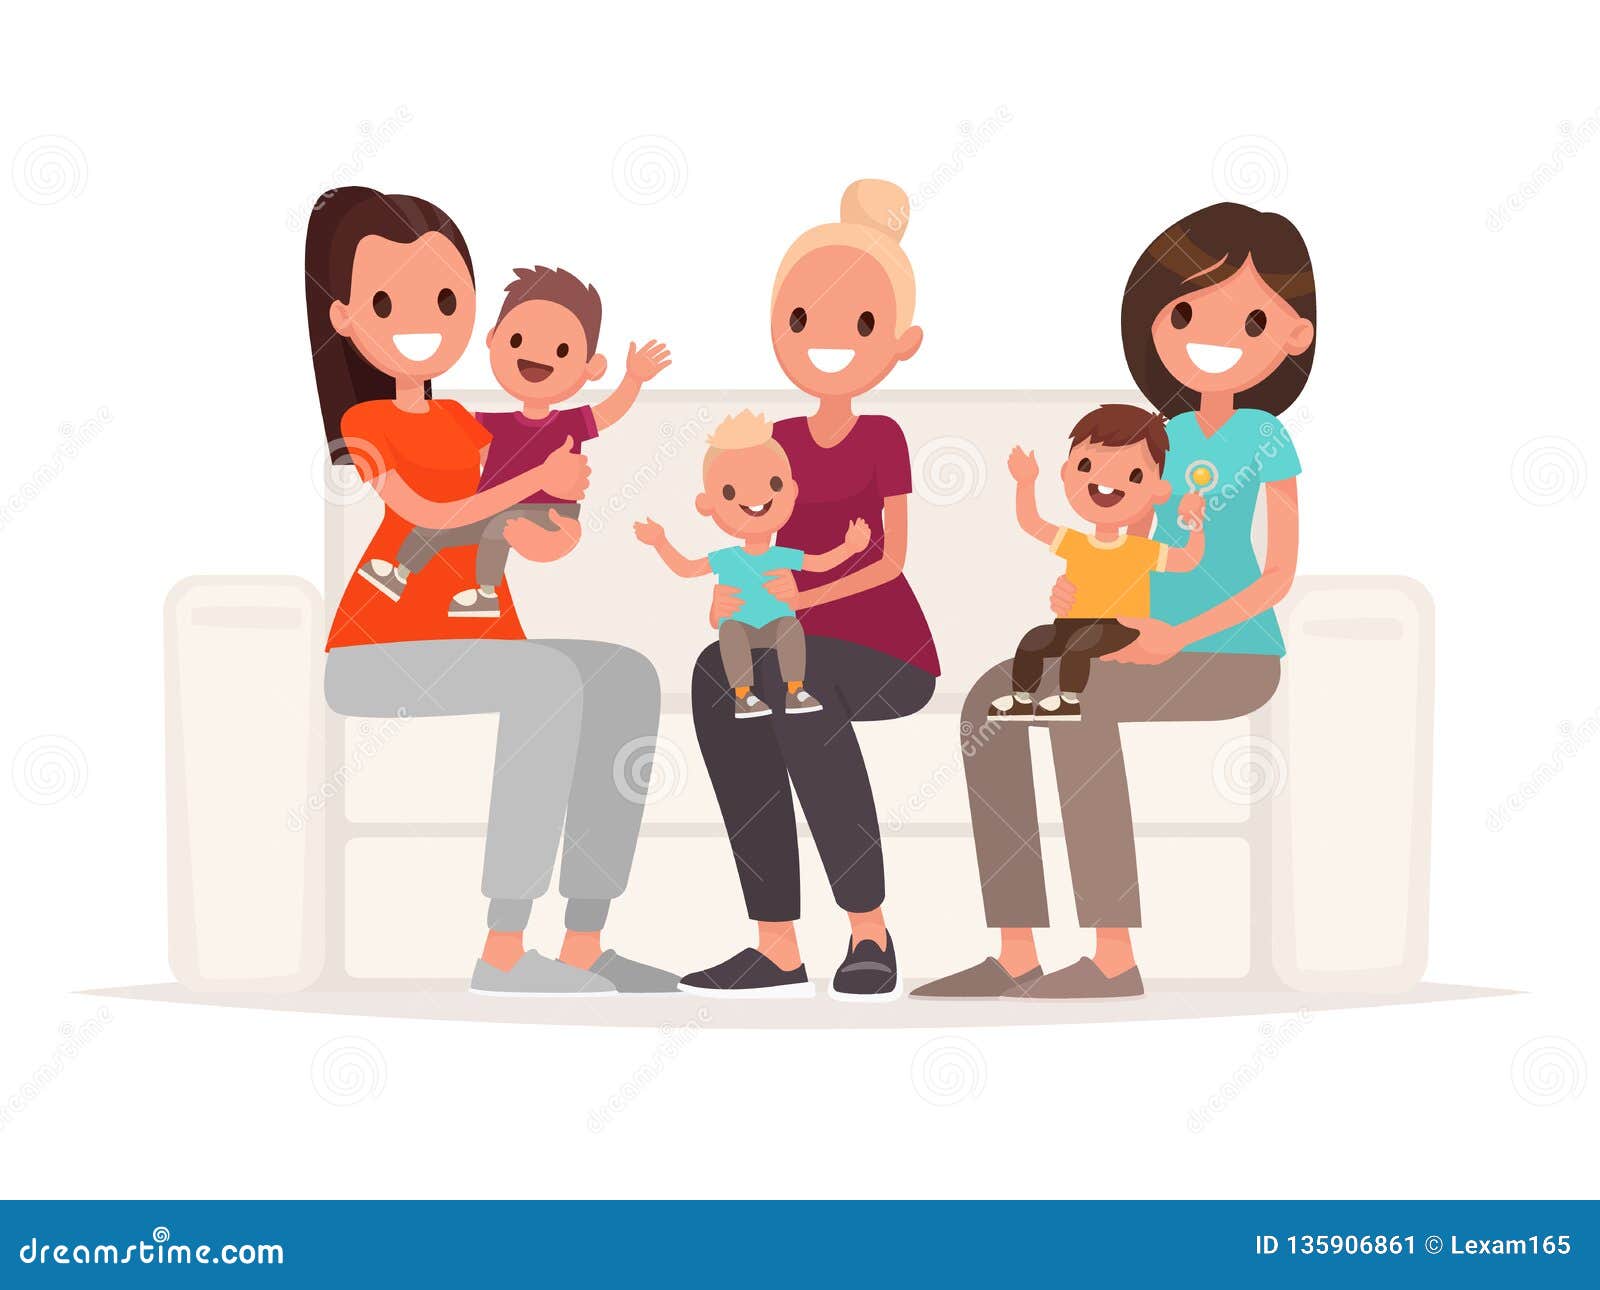 moms are holding babies in their arms while sitting on the sofa. communication of young mothers